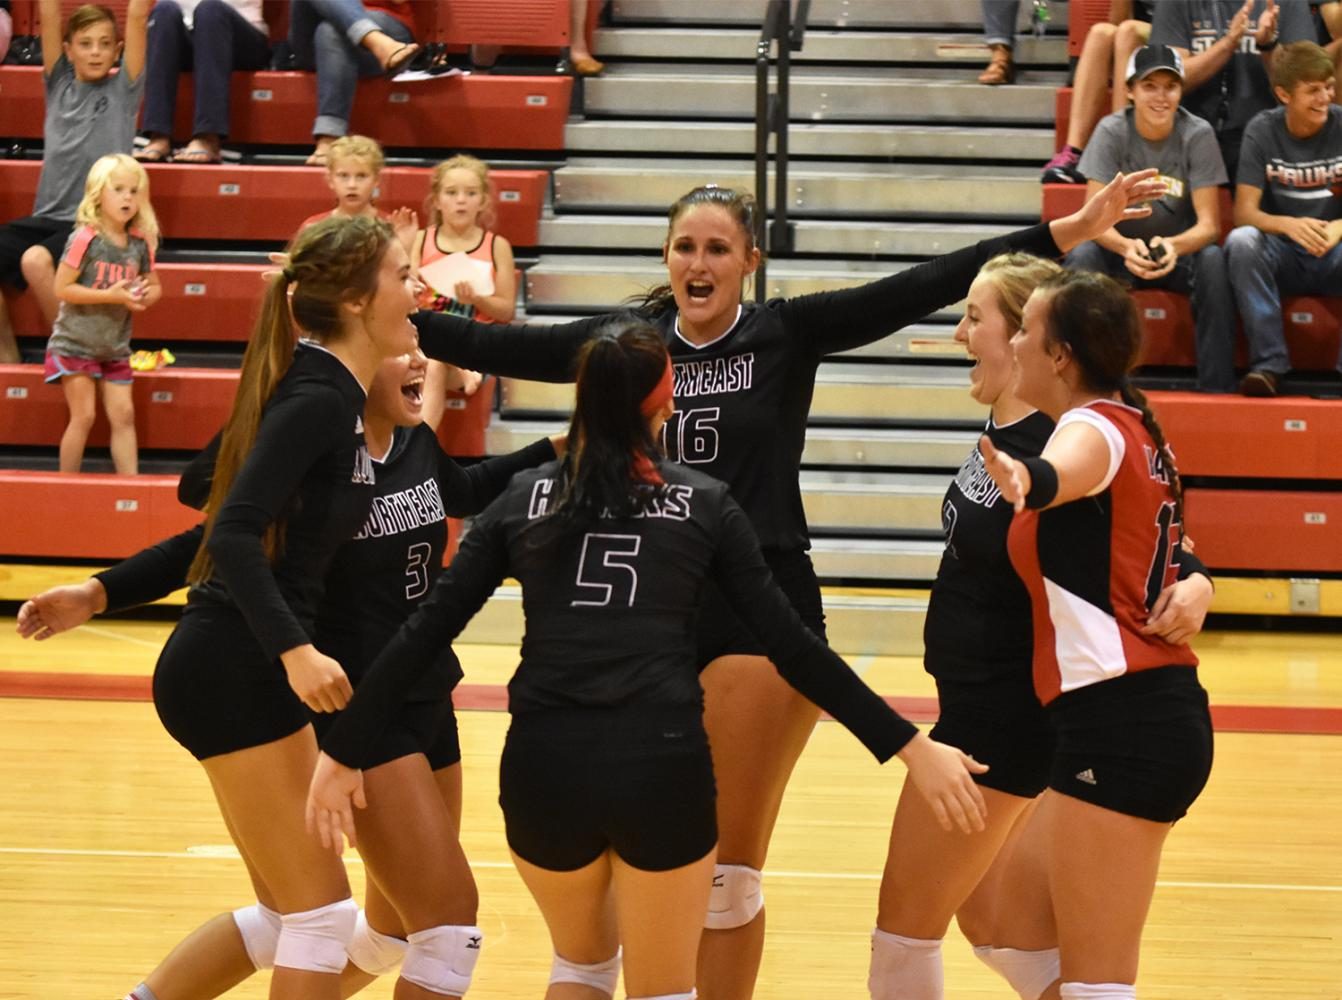 Hawks volleyball goes 1-1 in day one of Northeast tournament